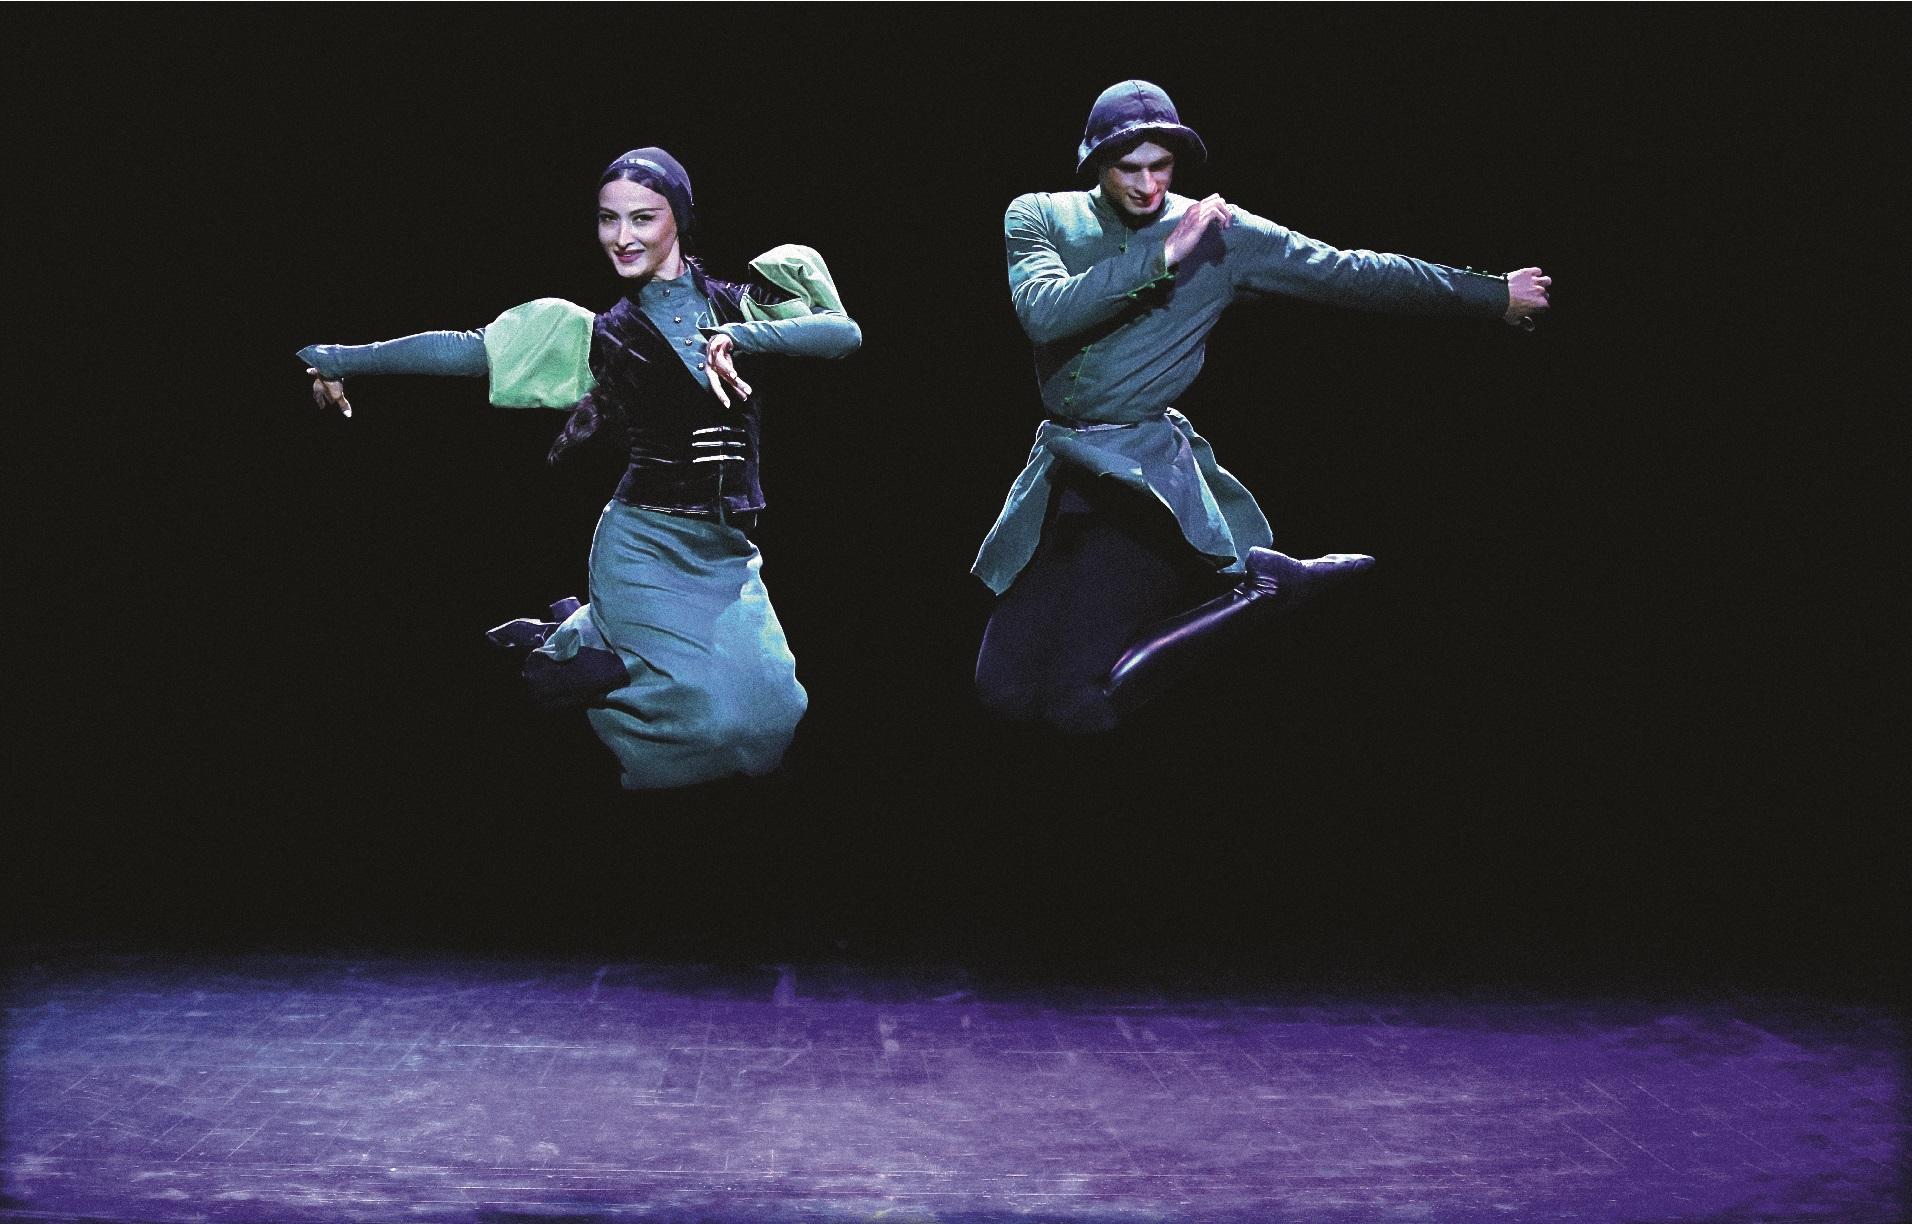 The Leisure and Cultural Services Department has invited the Georgian National Dance Company Sukhishvili to stage performances at the Sha Tin Town Hall on May 31 and June 1. Photo shows a scene from a past performance by the Georgian National Dance Company Sukhishvili.
